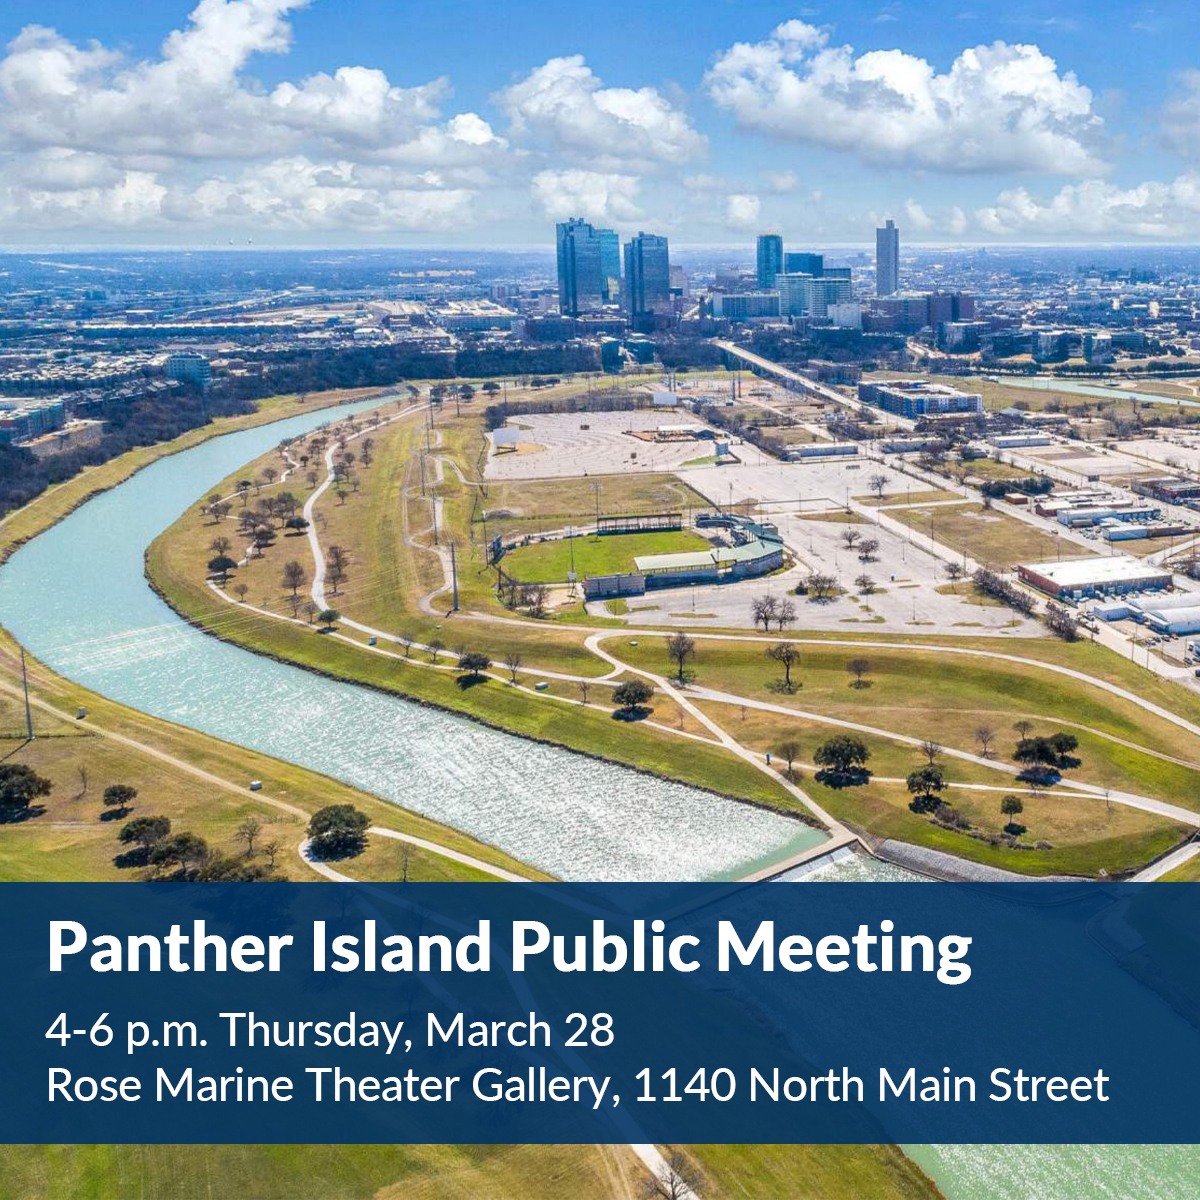 The @CityOfFortWorth and its partners are hosting an open house with the consultant team behind #PantherIsland, so the public can learn more and ask questions about the final strategic vision report. 📆 4-6 p.m. Thursday, March 28, at the Rose Marine Theater, 1440 North Main St.